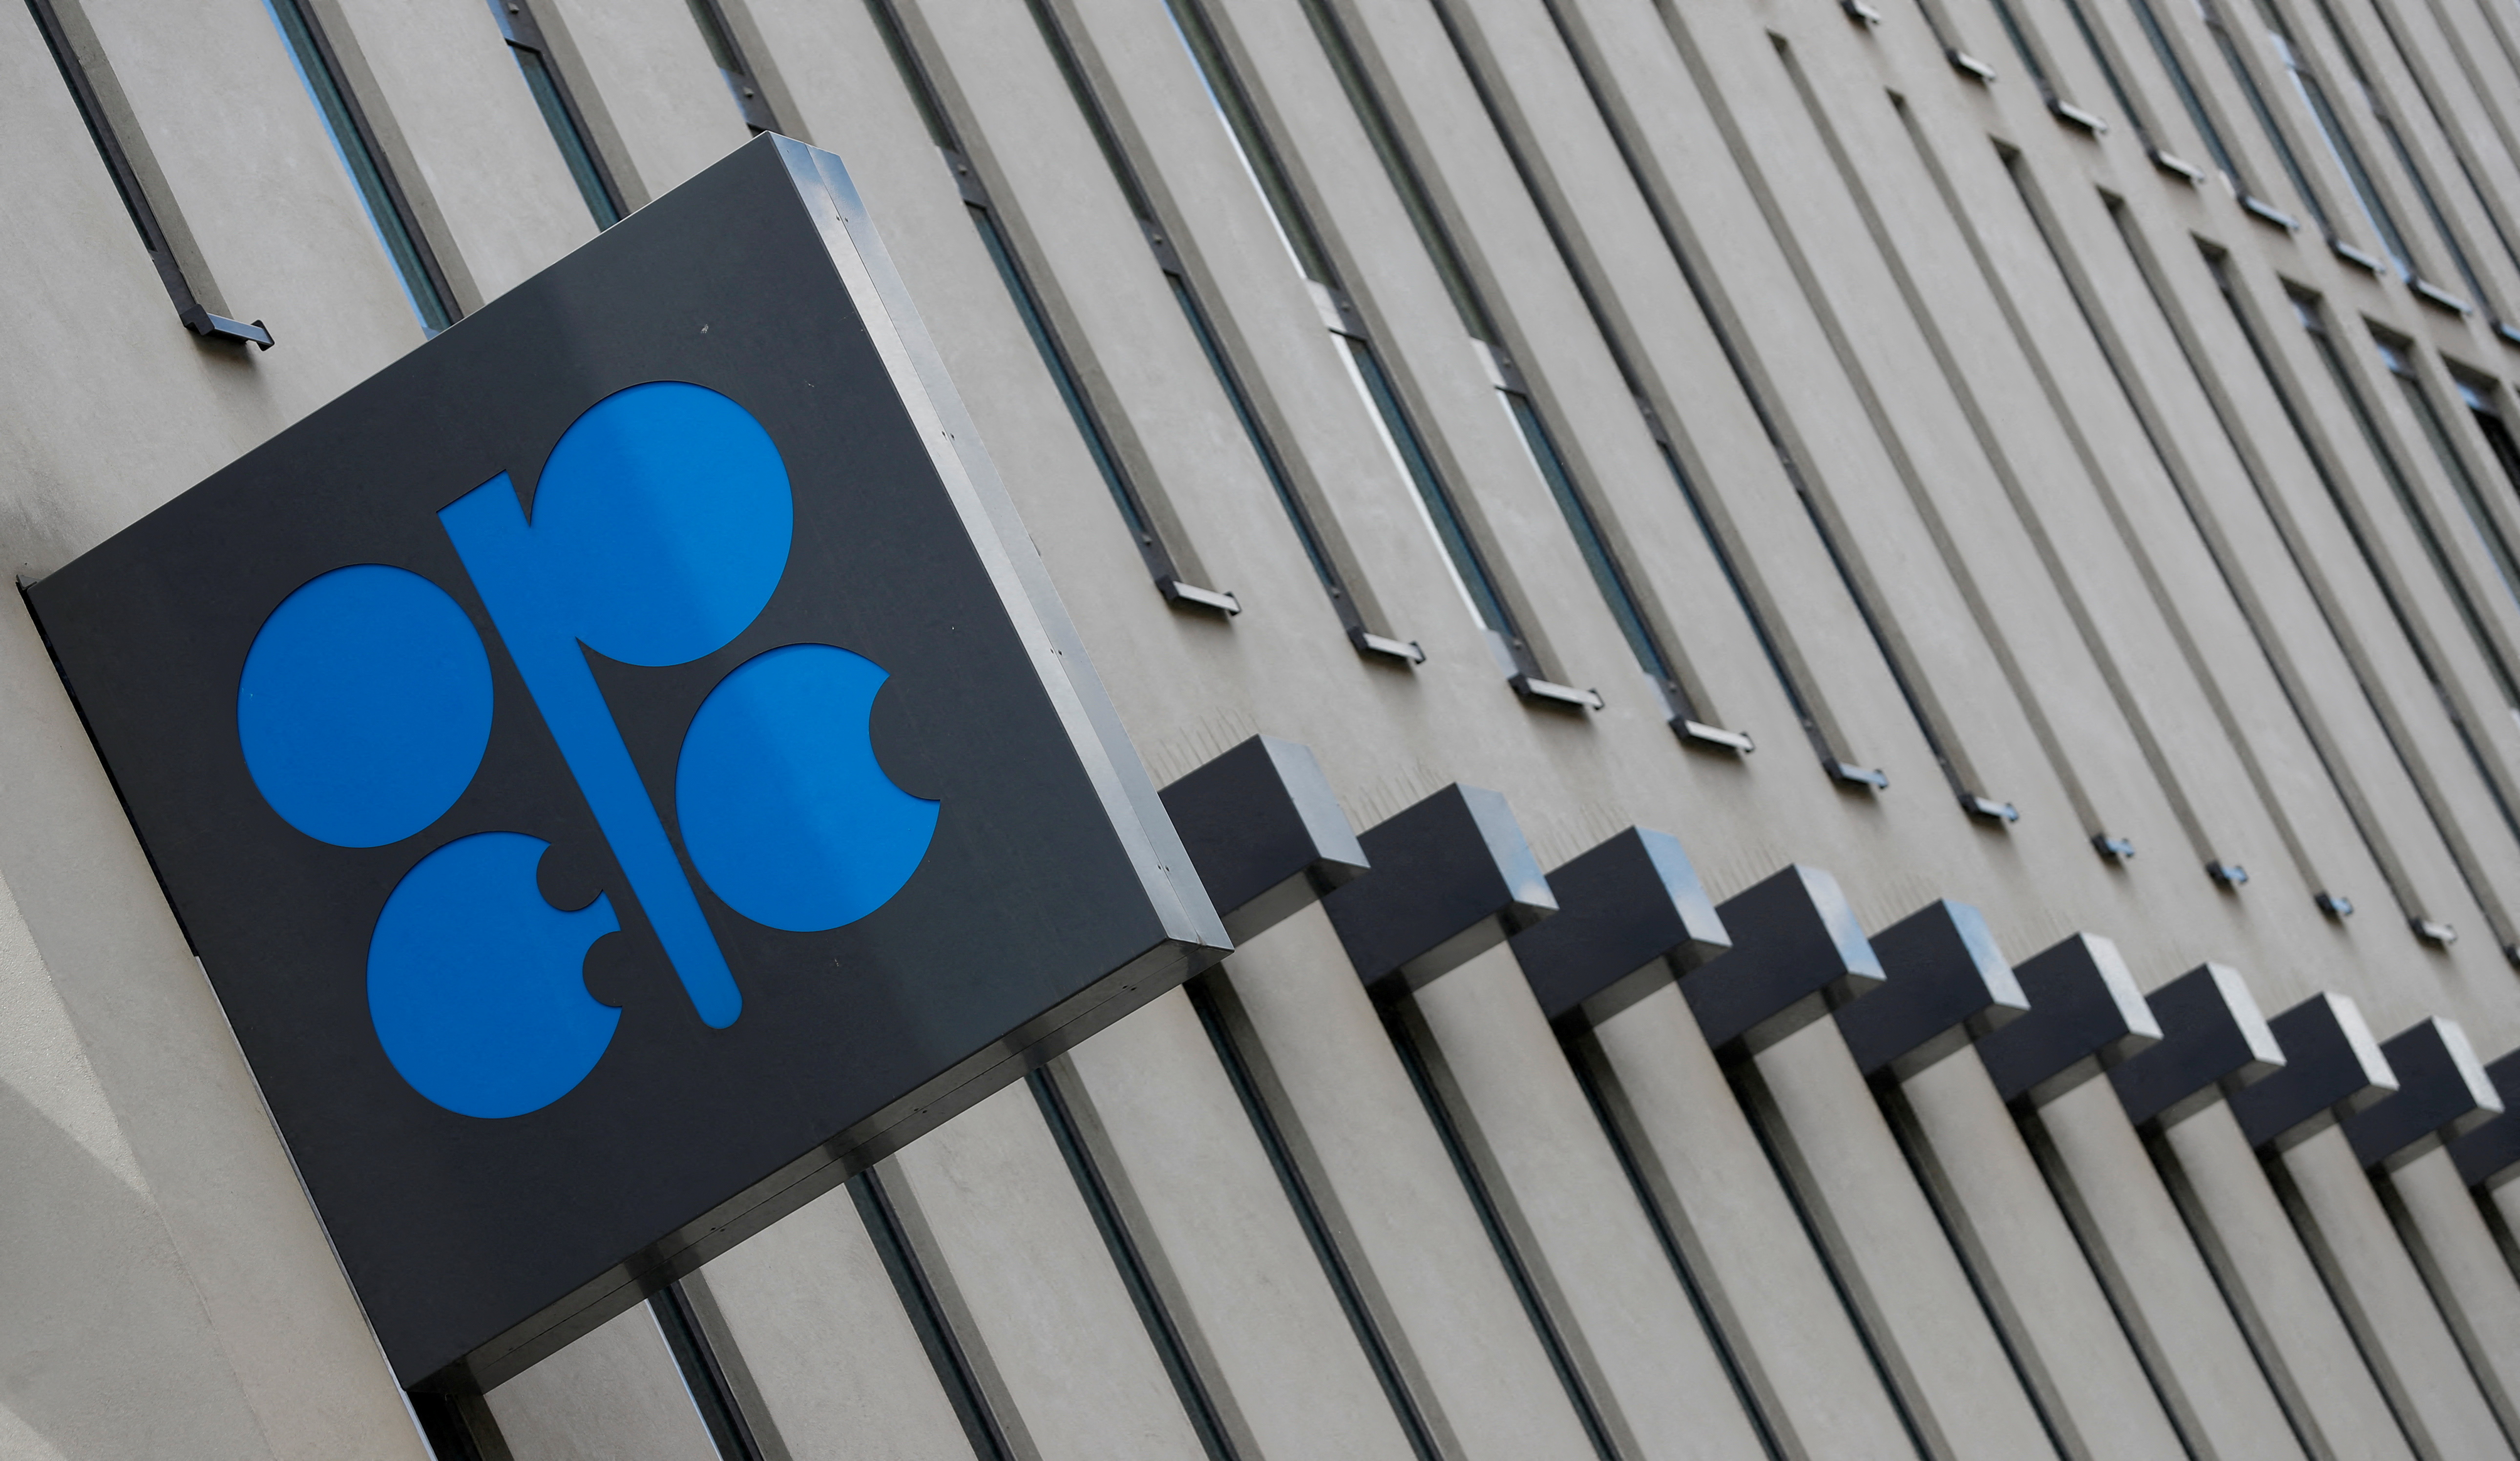 The OPEC logo is seen at OPEC's headquarters in Vienna